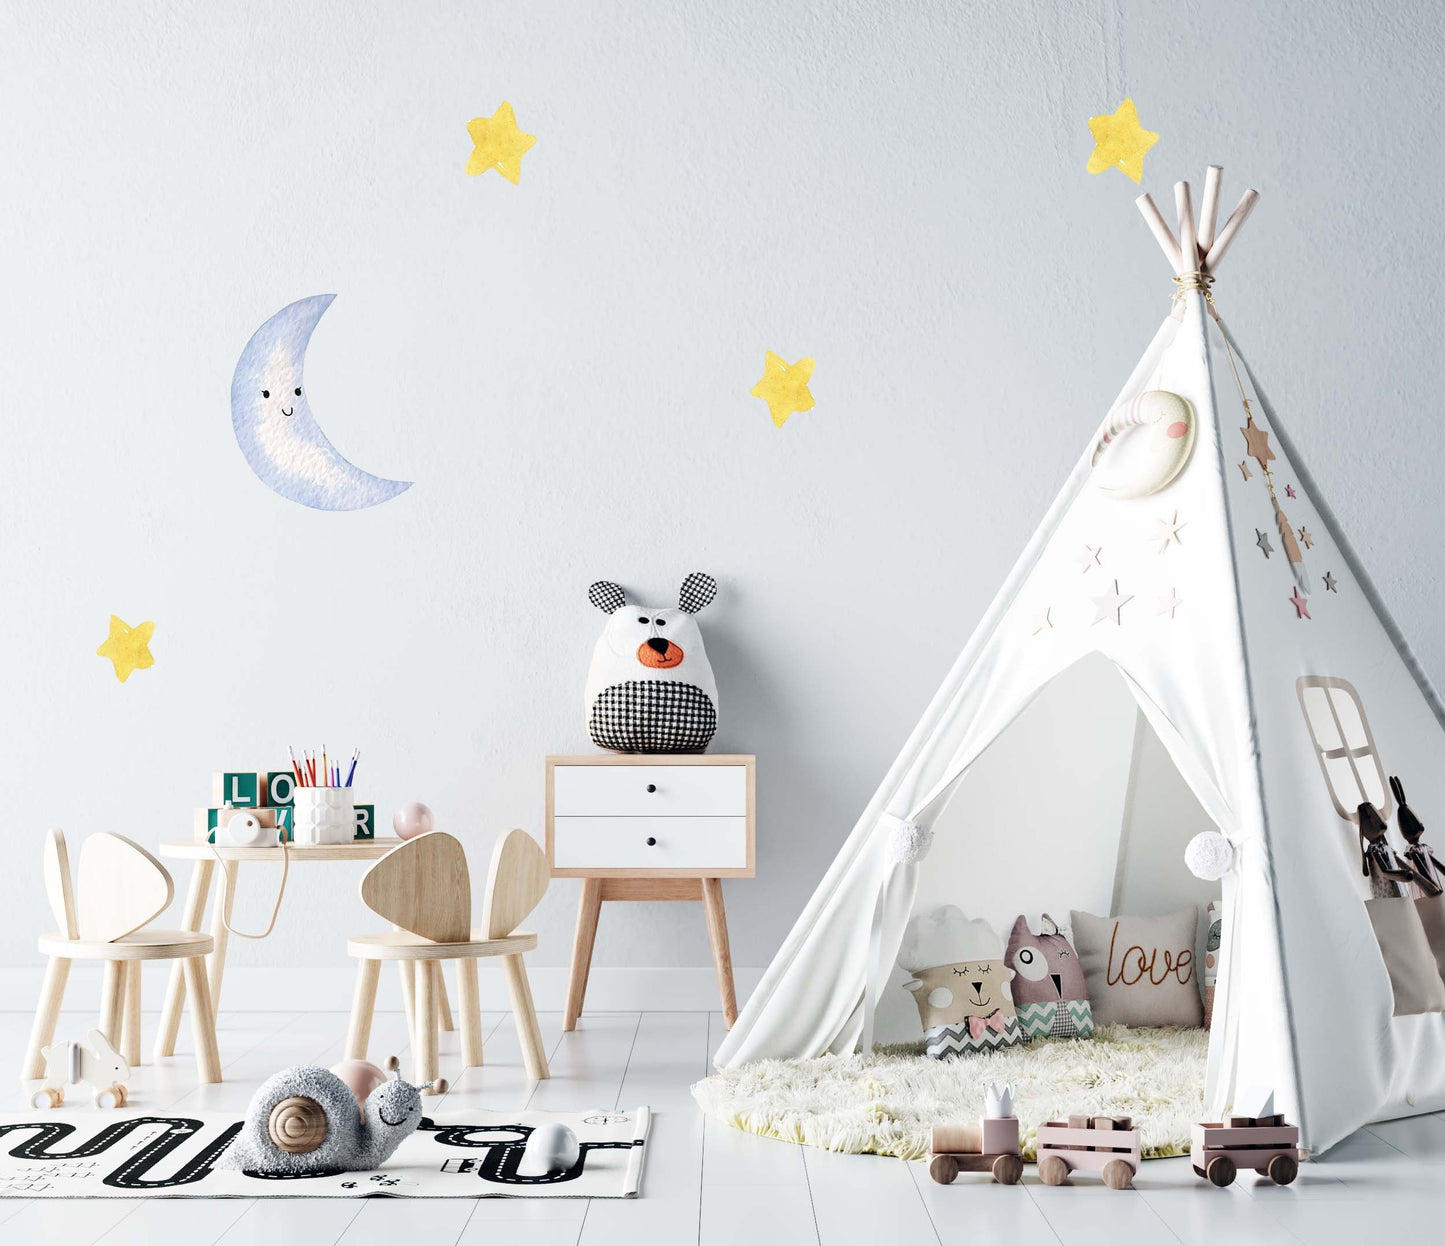 Star Wall Decals Moon Stickers Yellow, LF206